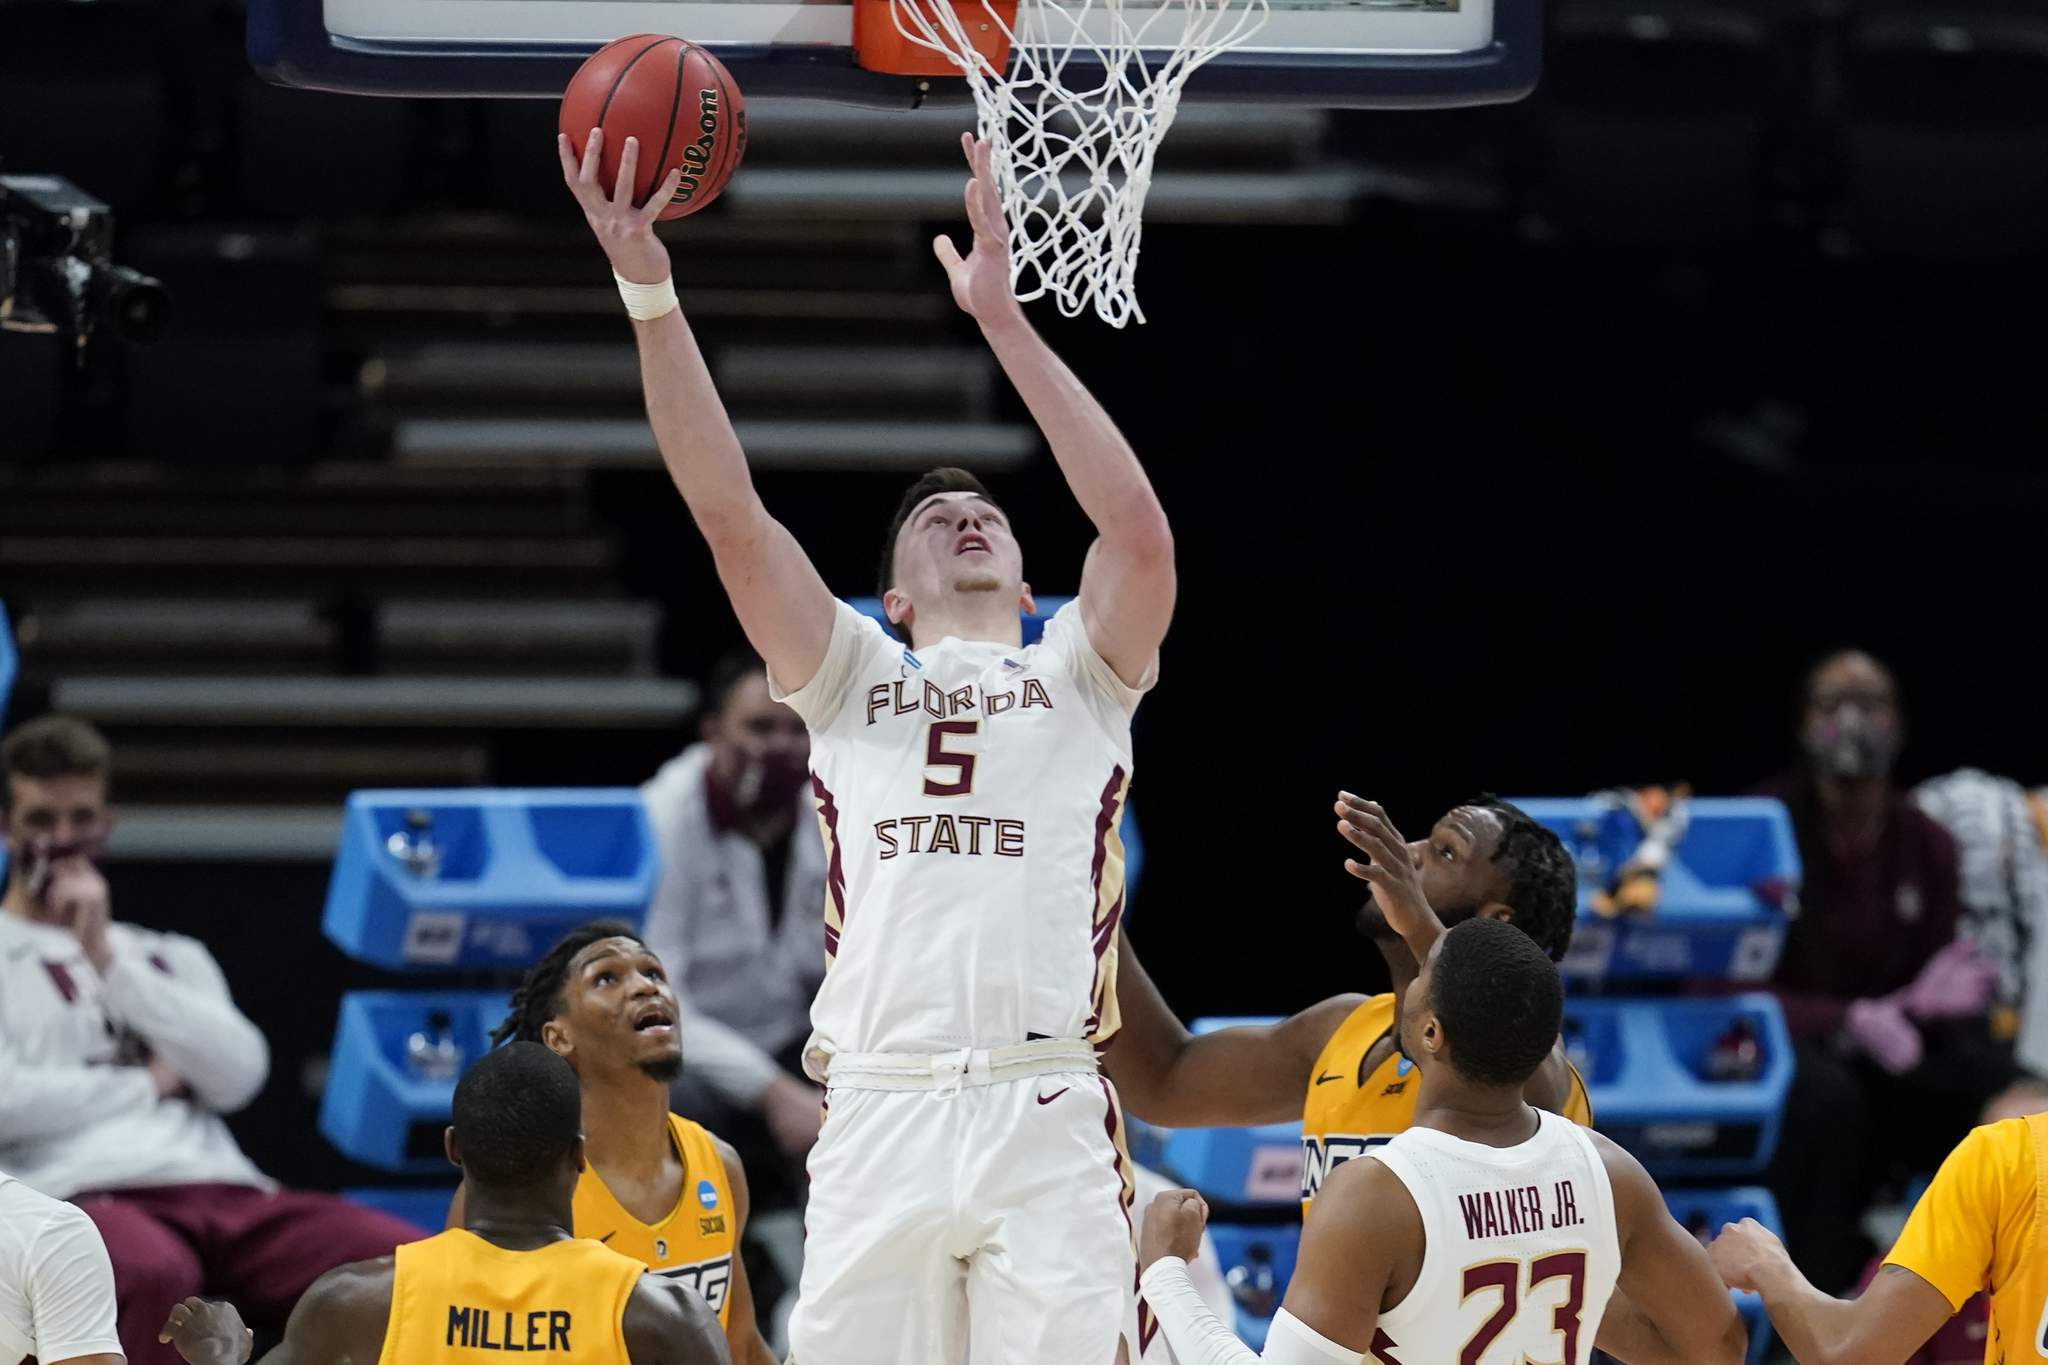 Florida State cold from deep, outlasts UNCG in NCAA tourney